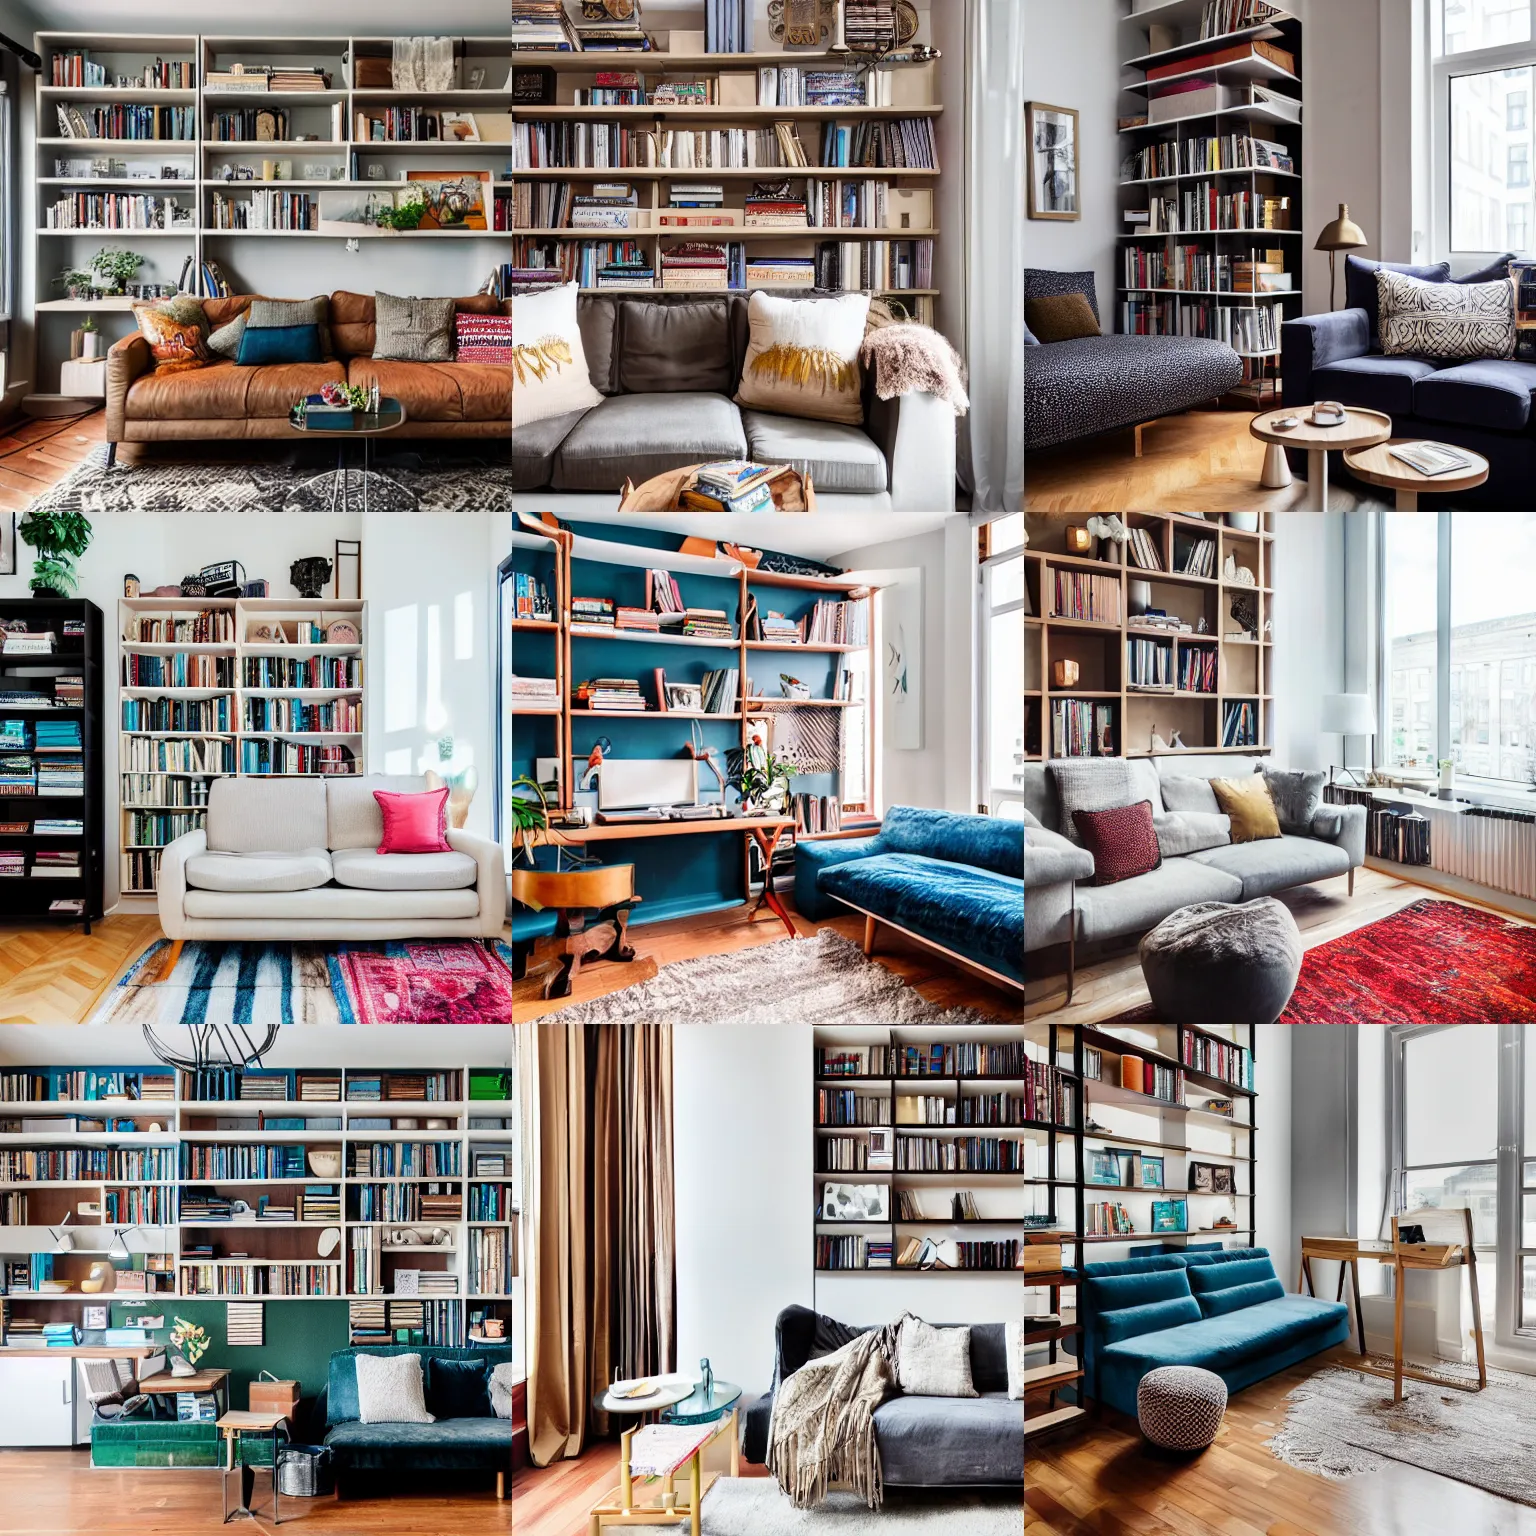 Prompt: award winning interior design city apartment, cozy, calm, wood floor, fabrics and textiles, colorful accents, book shelf, couch, desk photograph magazine, wide angle